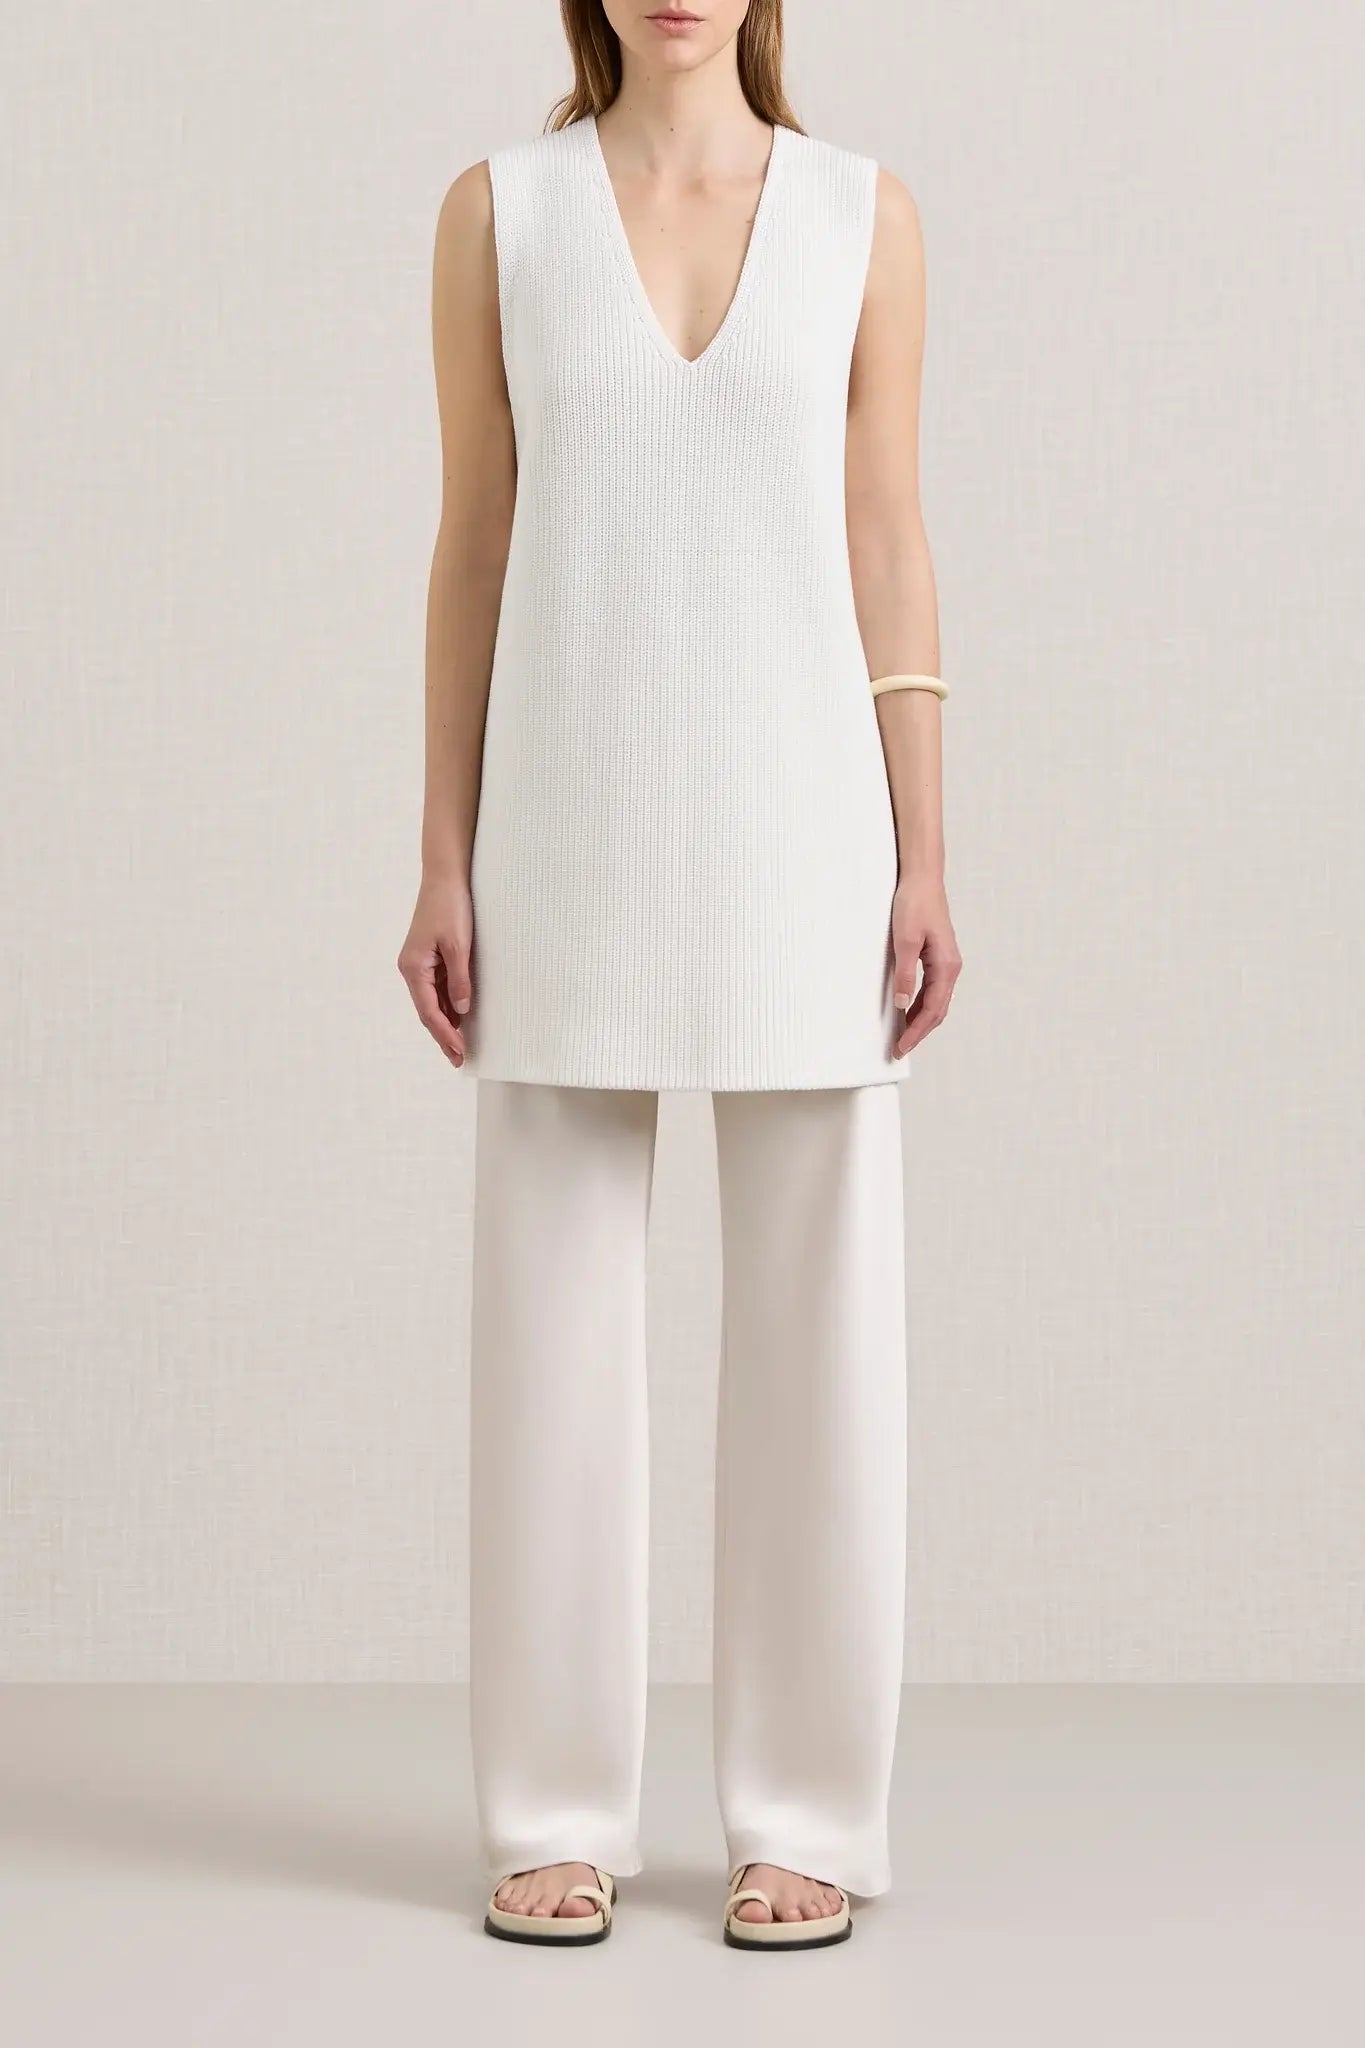 A.Emery Talman Knit in Parchment available at The New Trend Australia.